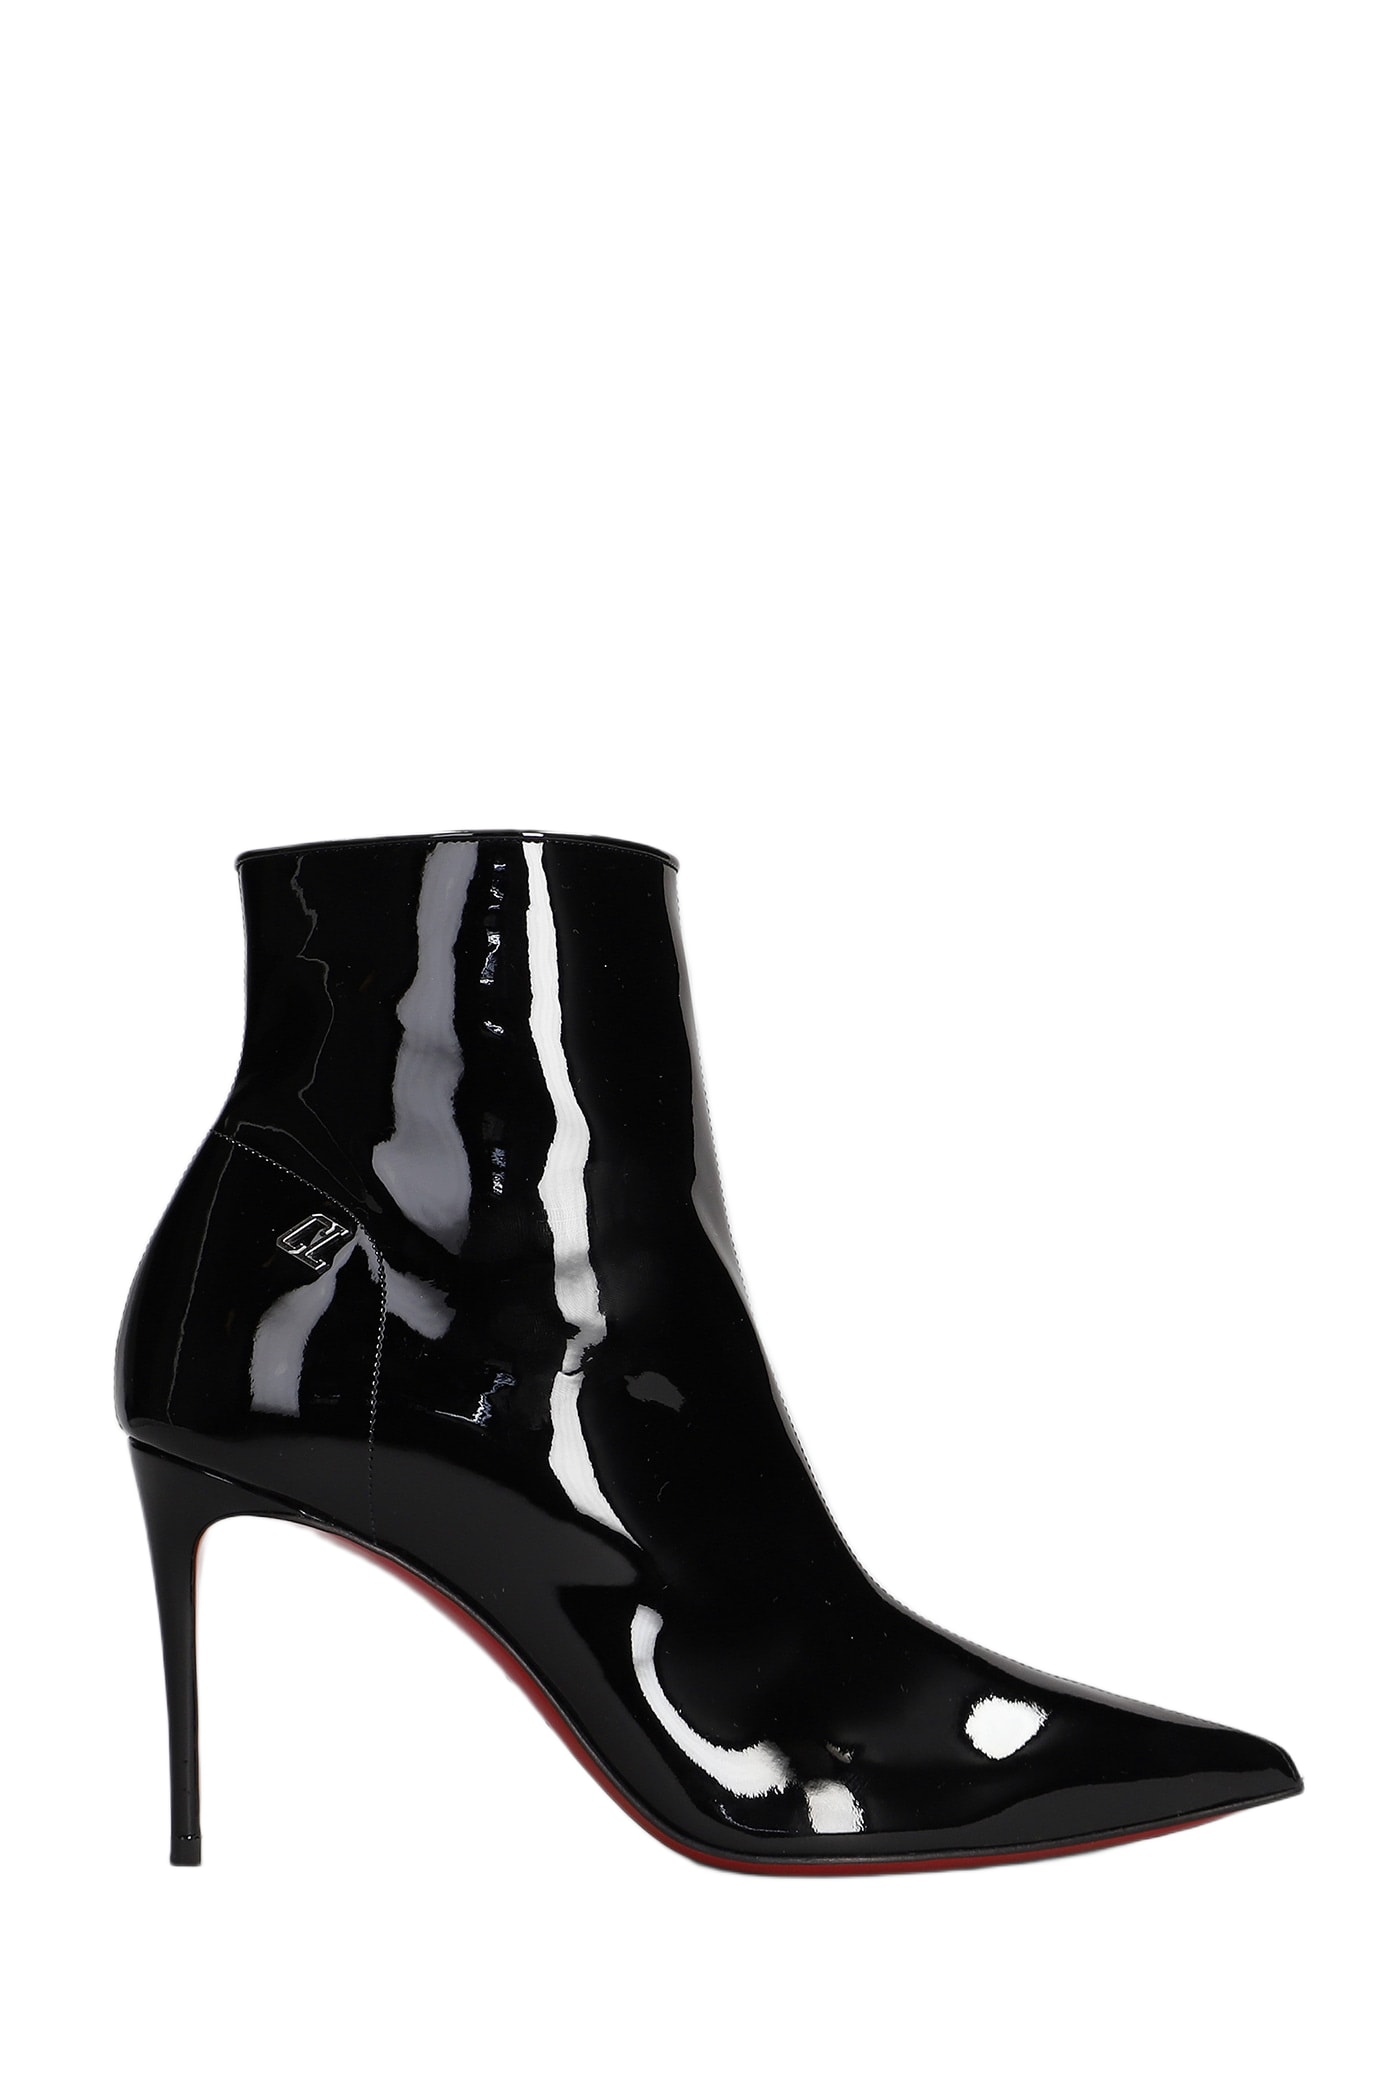 Sporty Kate 85 Patent Leather Boots in Black - Christian Louboutin